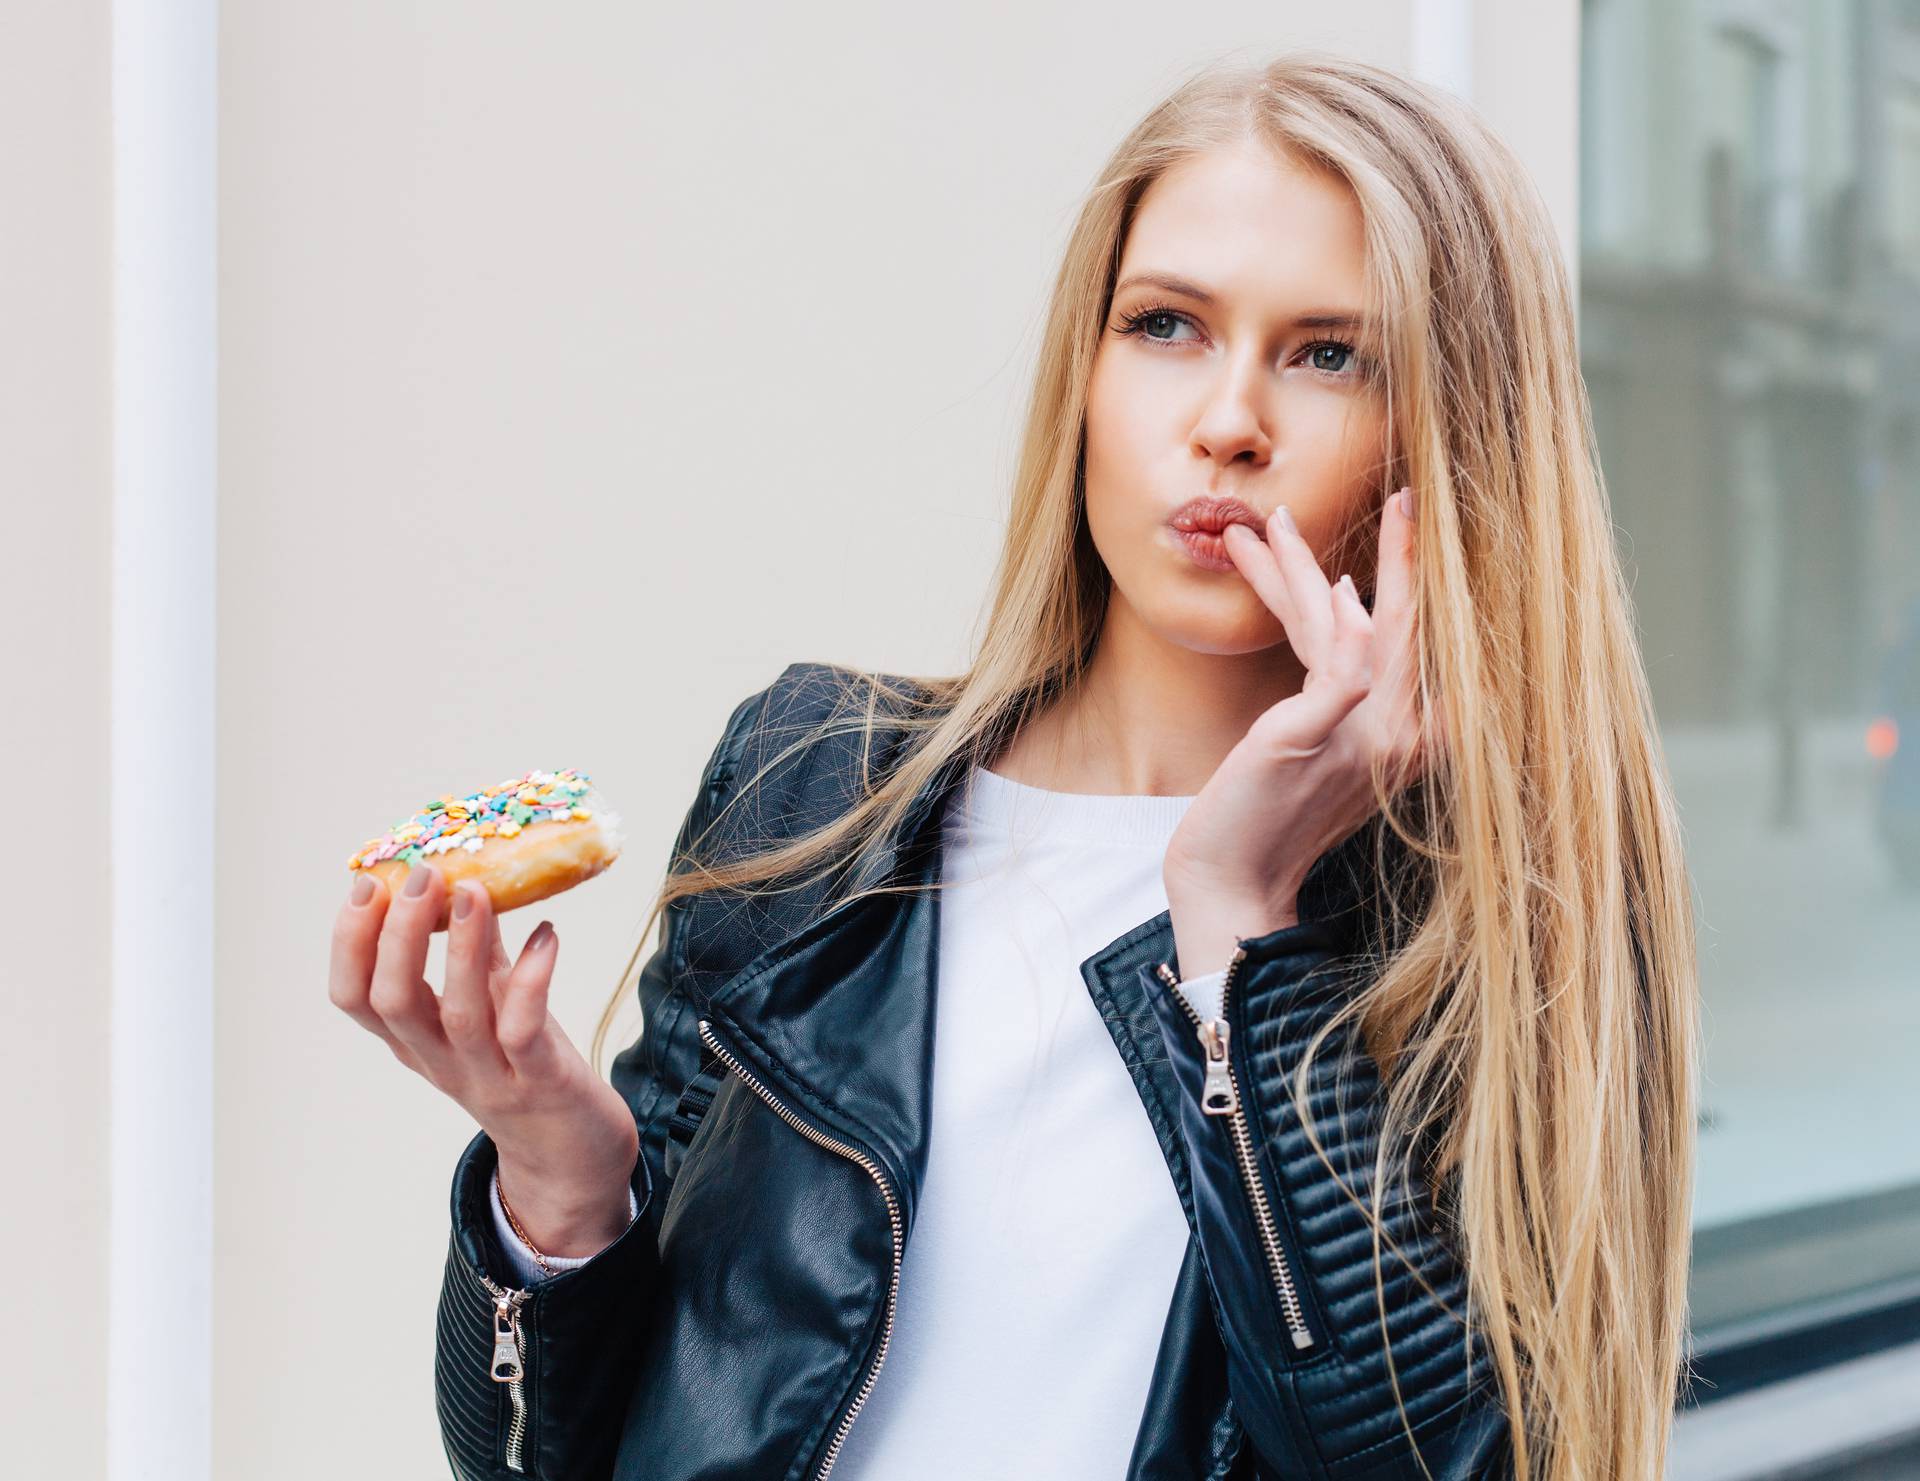 Beautiful young sexy woman eating a donut, licking her fingers taking pleasure a European city street. Outdoor. Warm color.